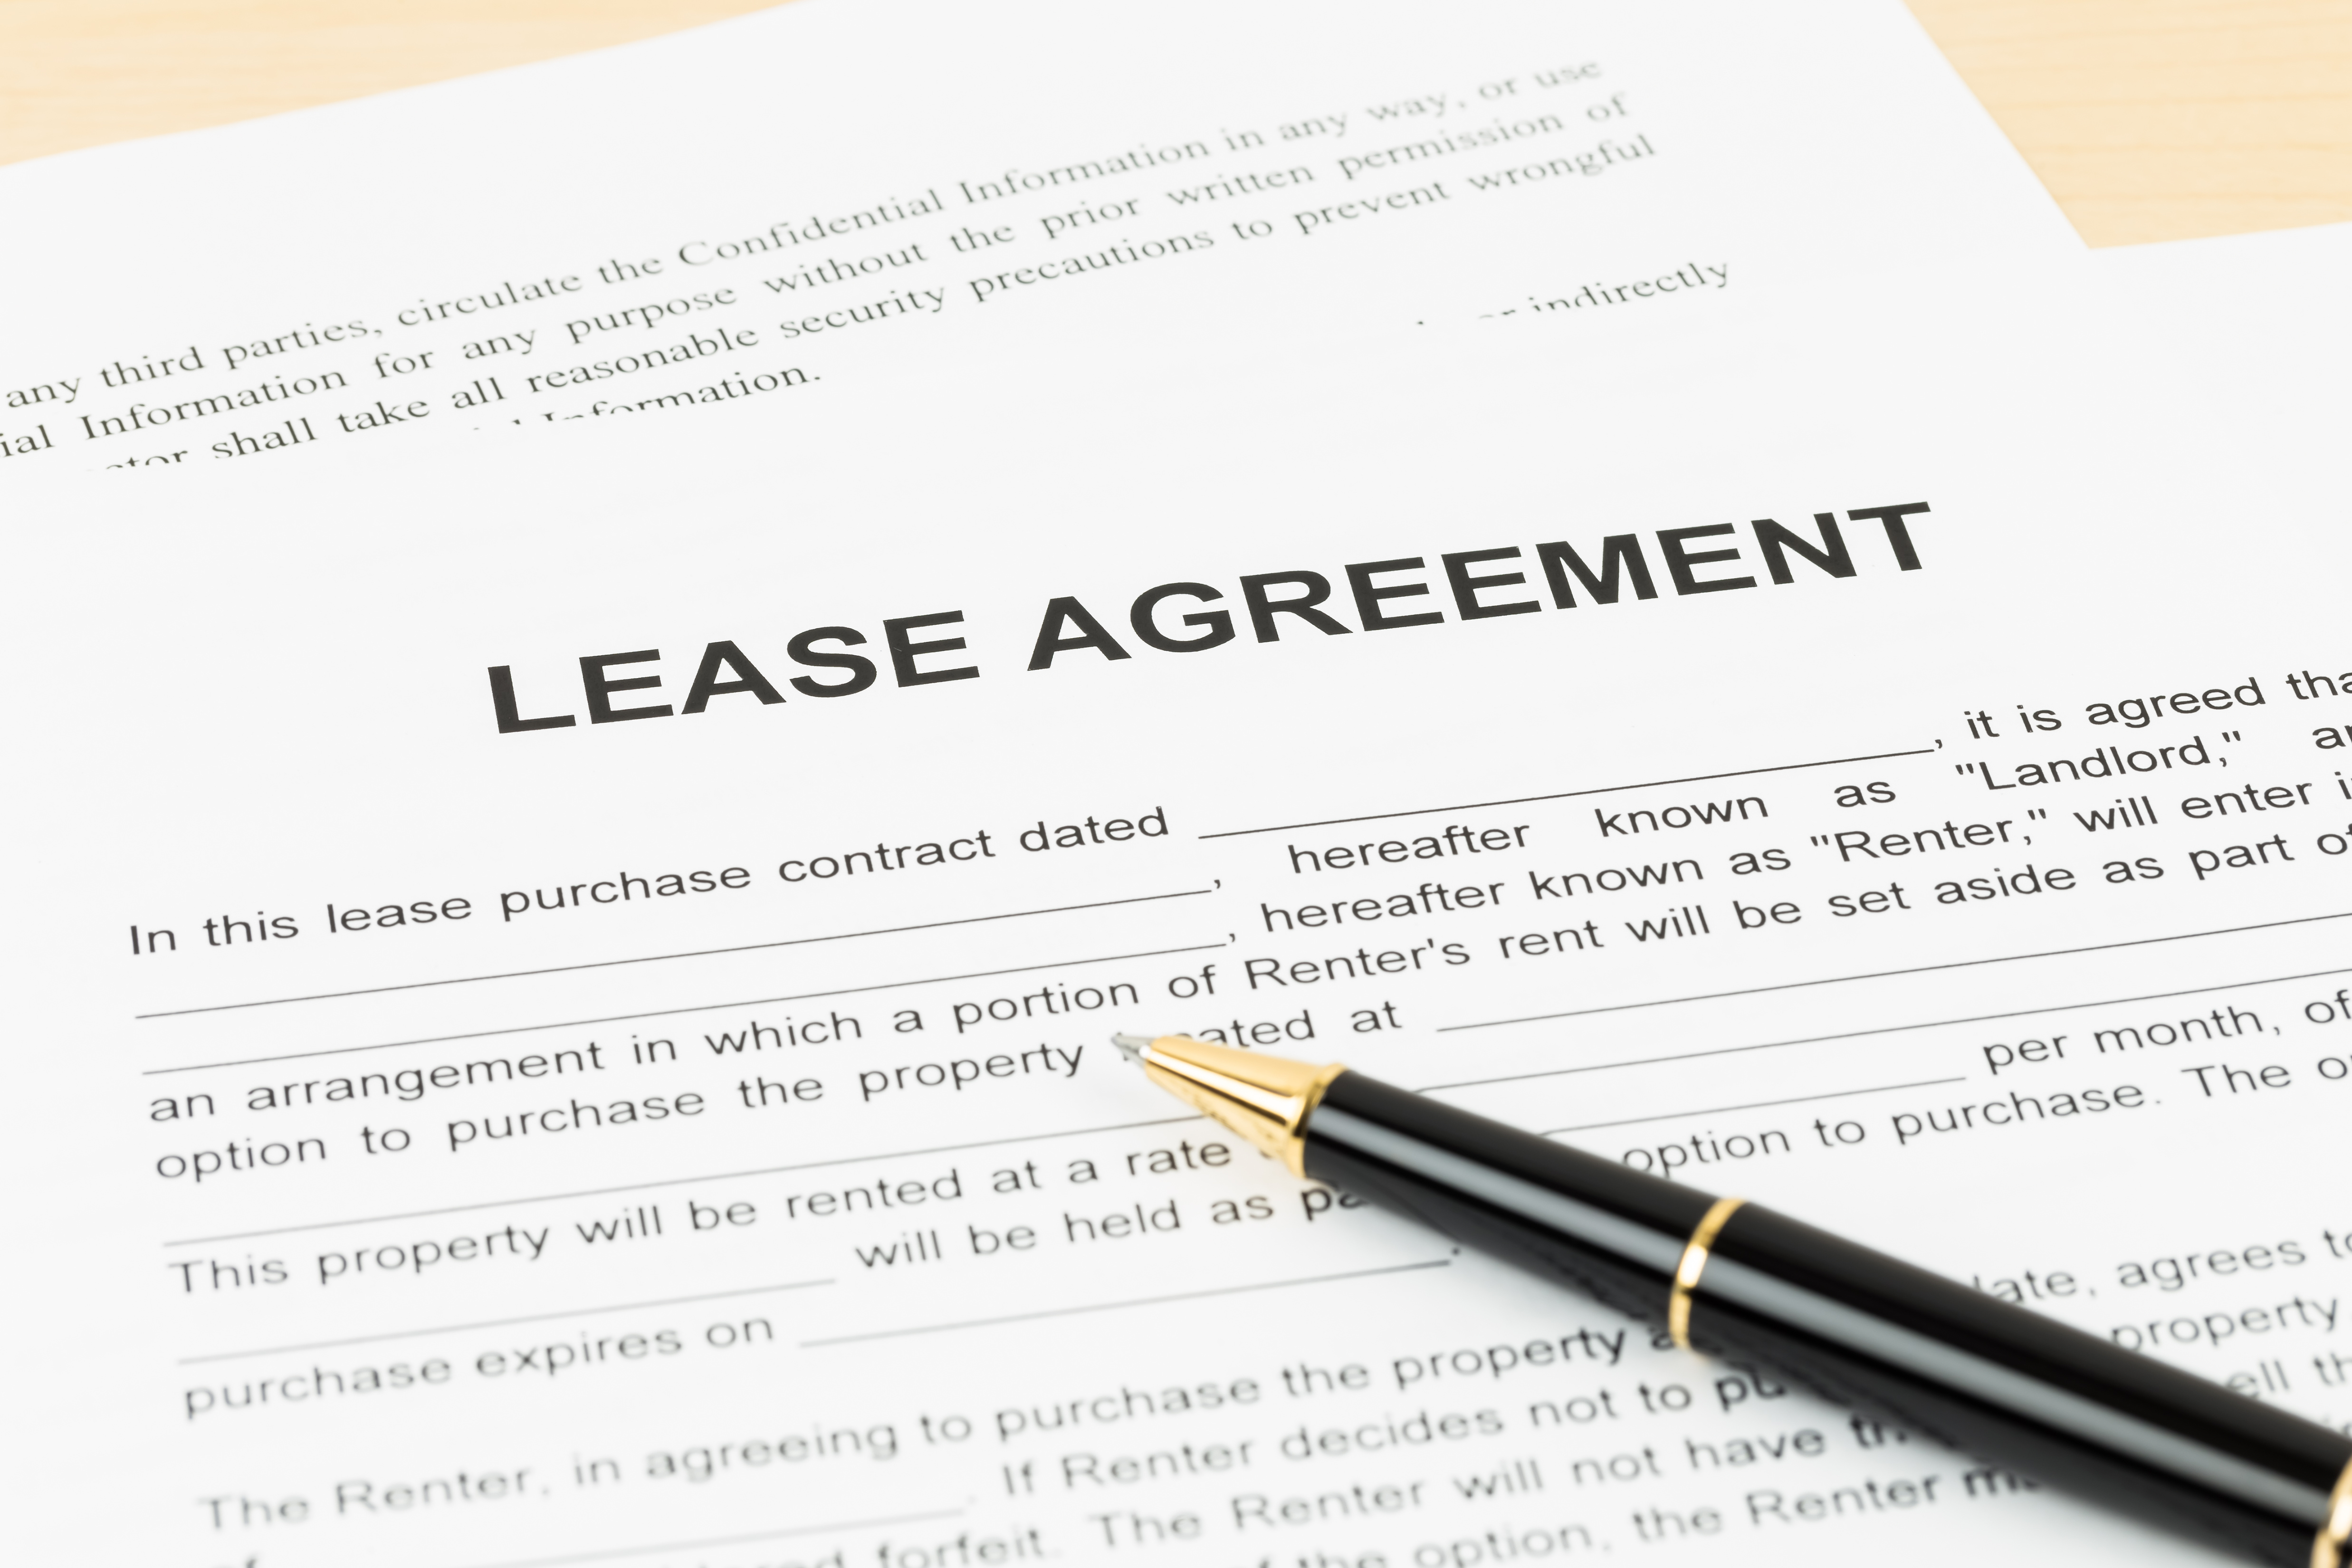 An image of a customized office equipment lease agreement for a business.